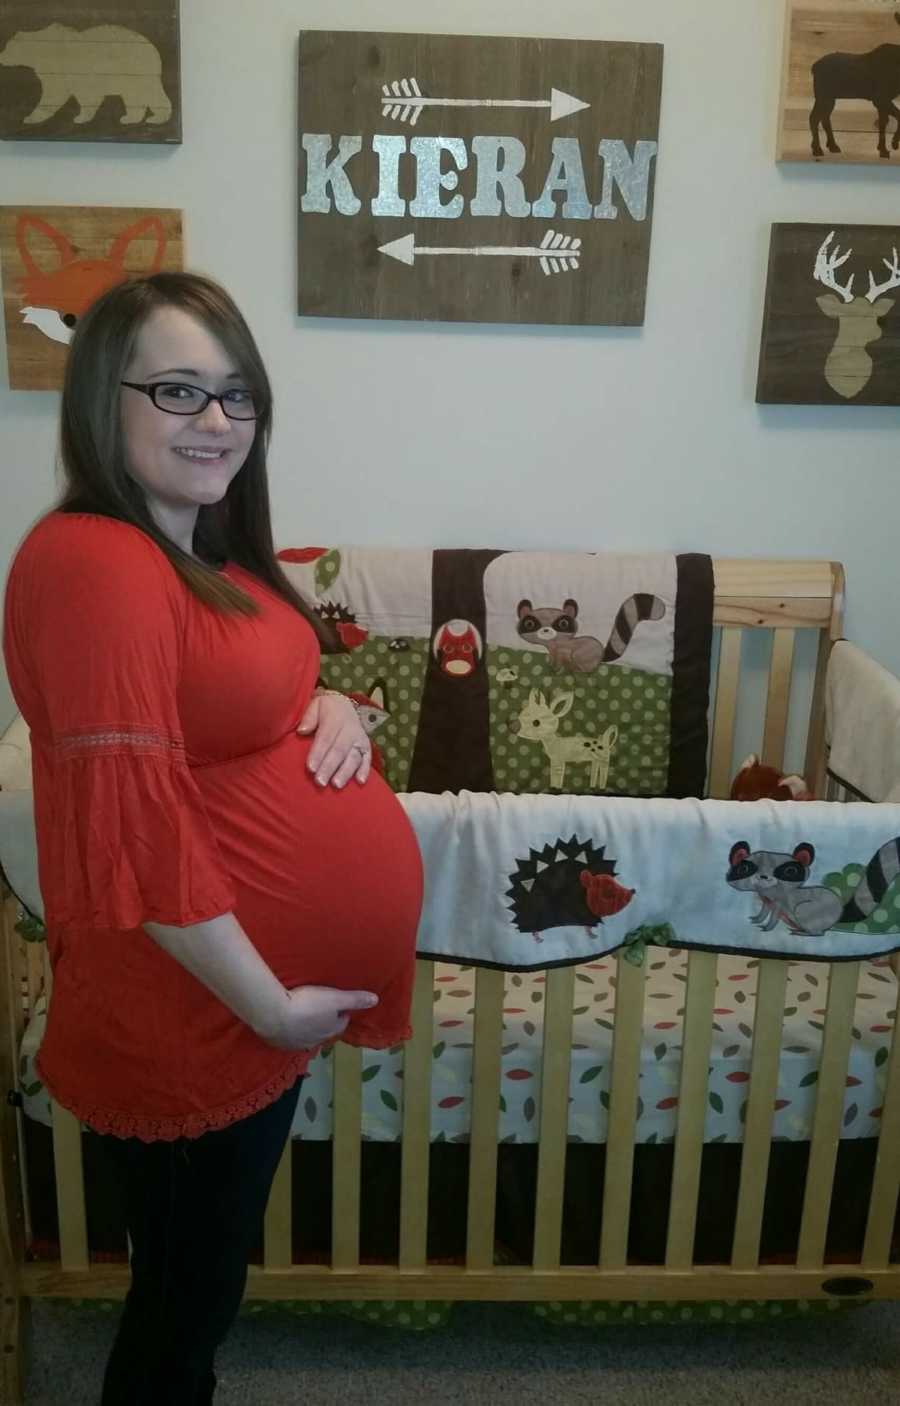 Pregnant woman with endometriosis stands beside crib for little boy